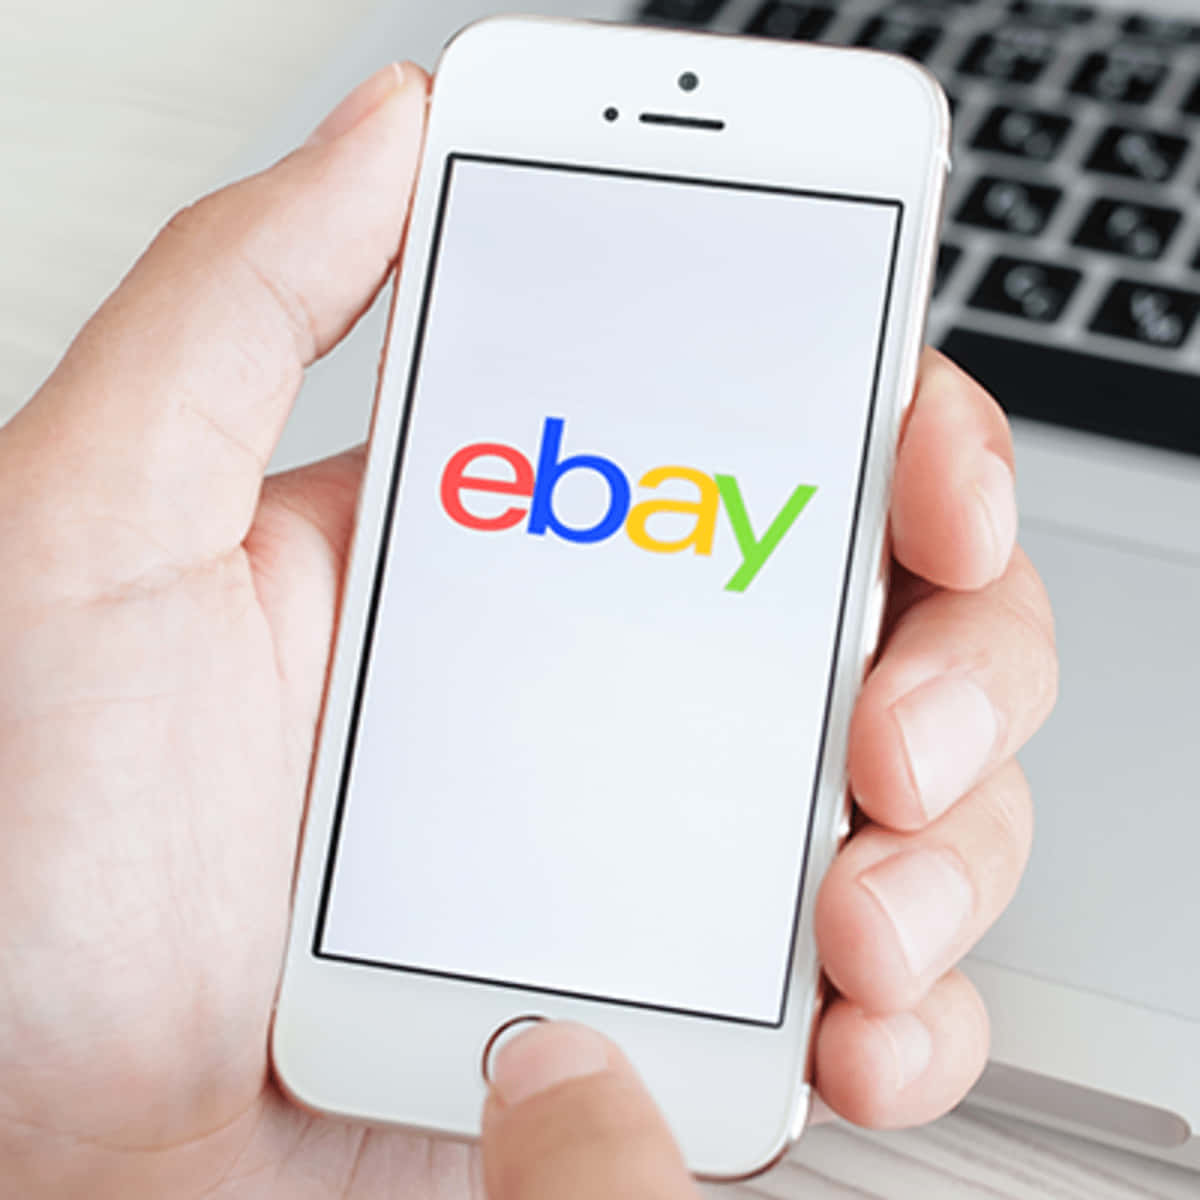 Ebay - The Best Place To Sell Your Products